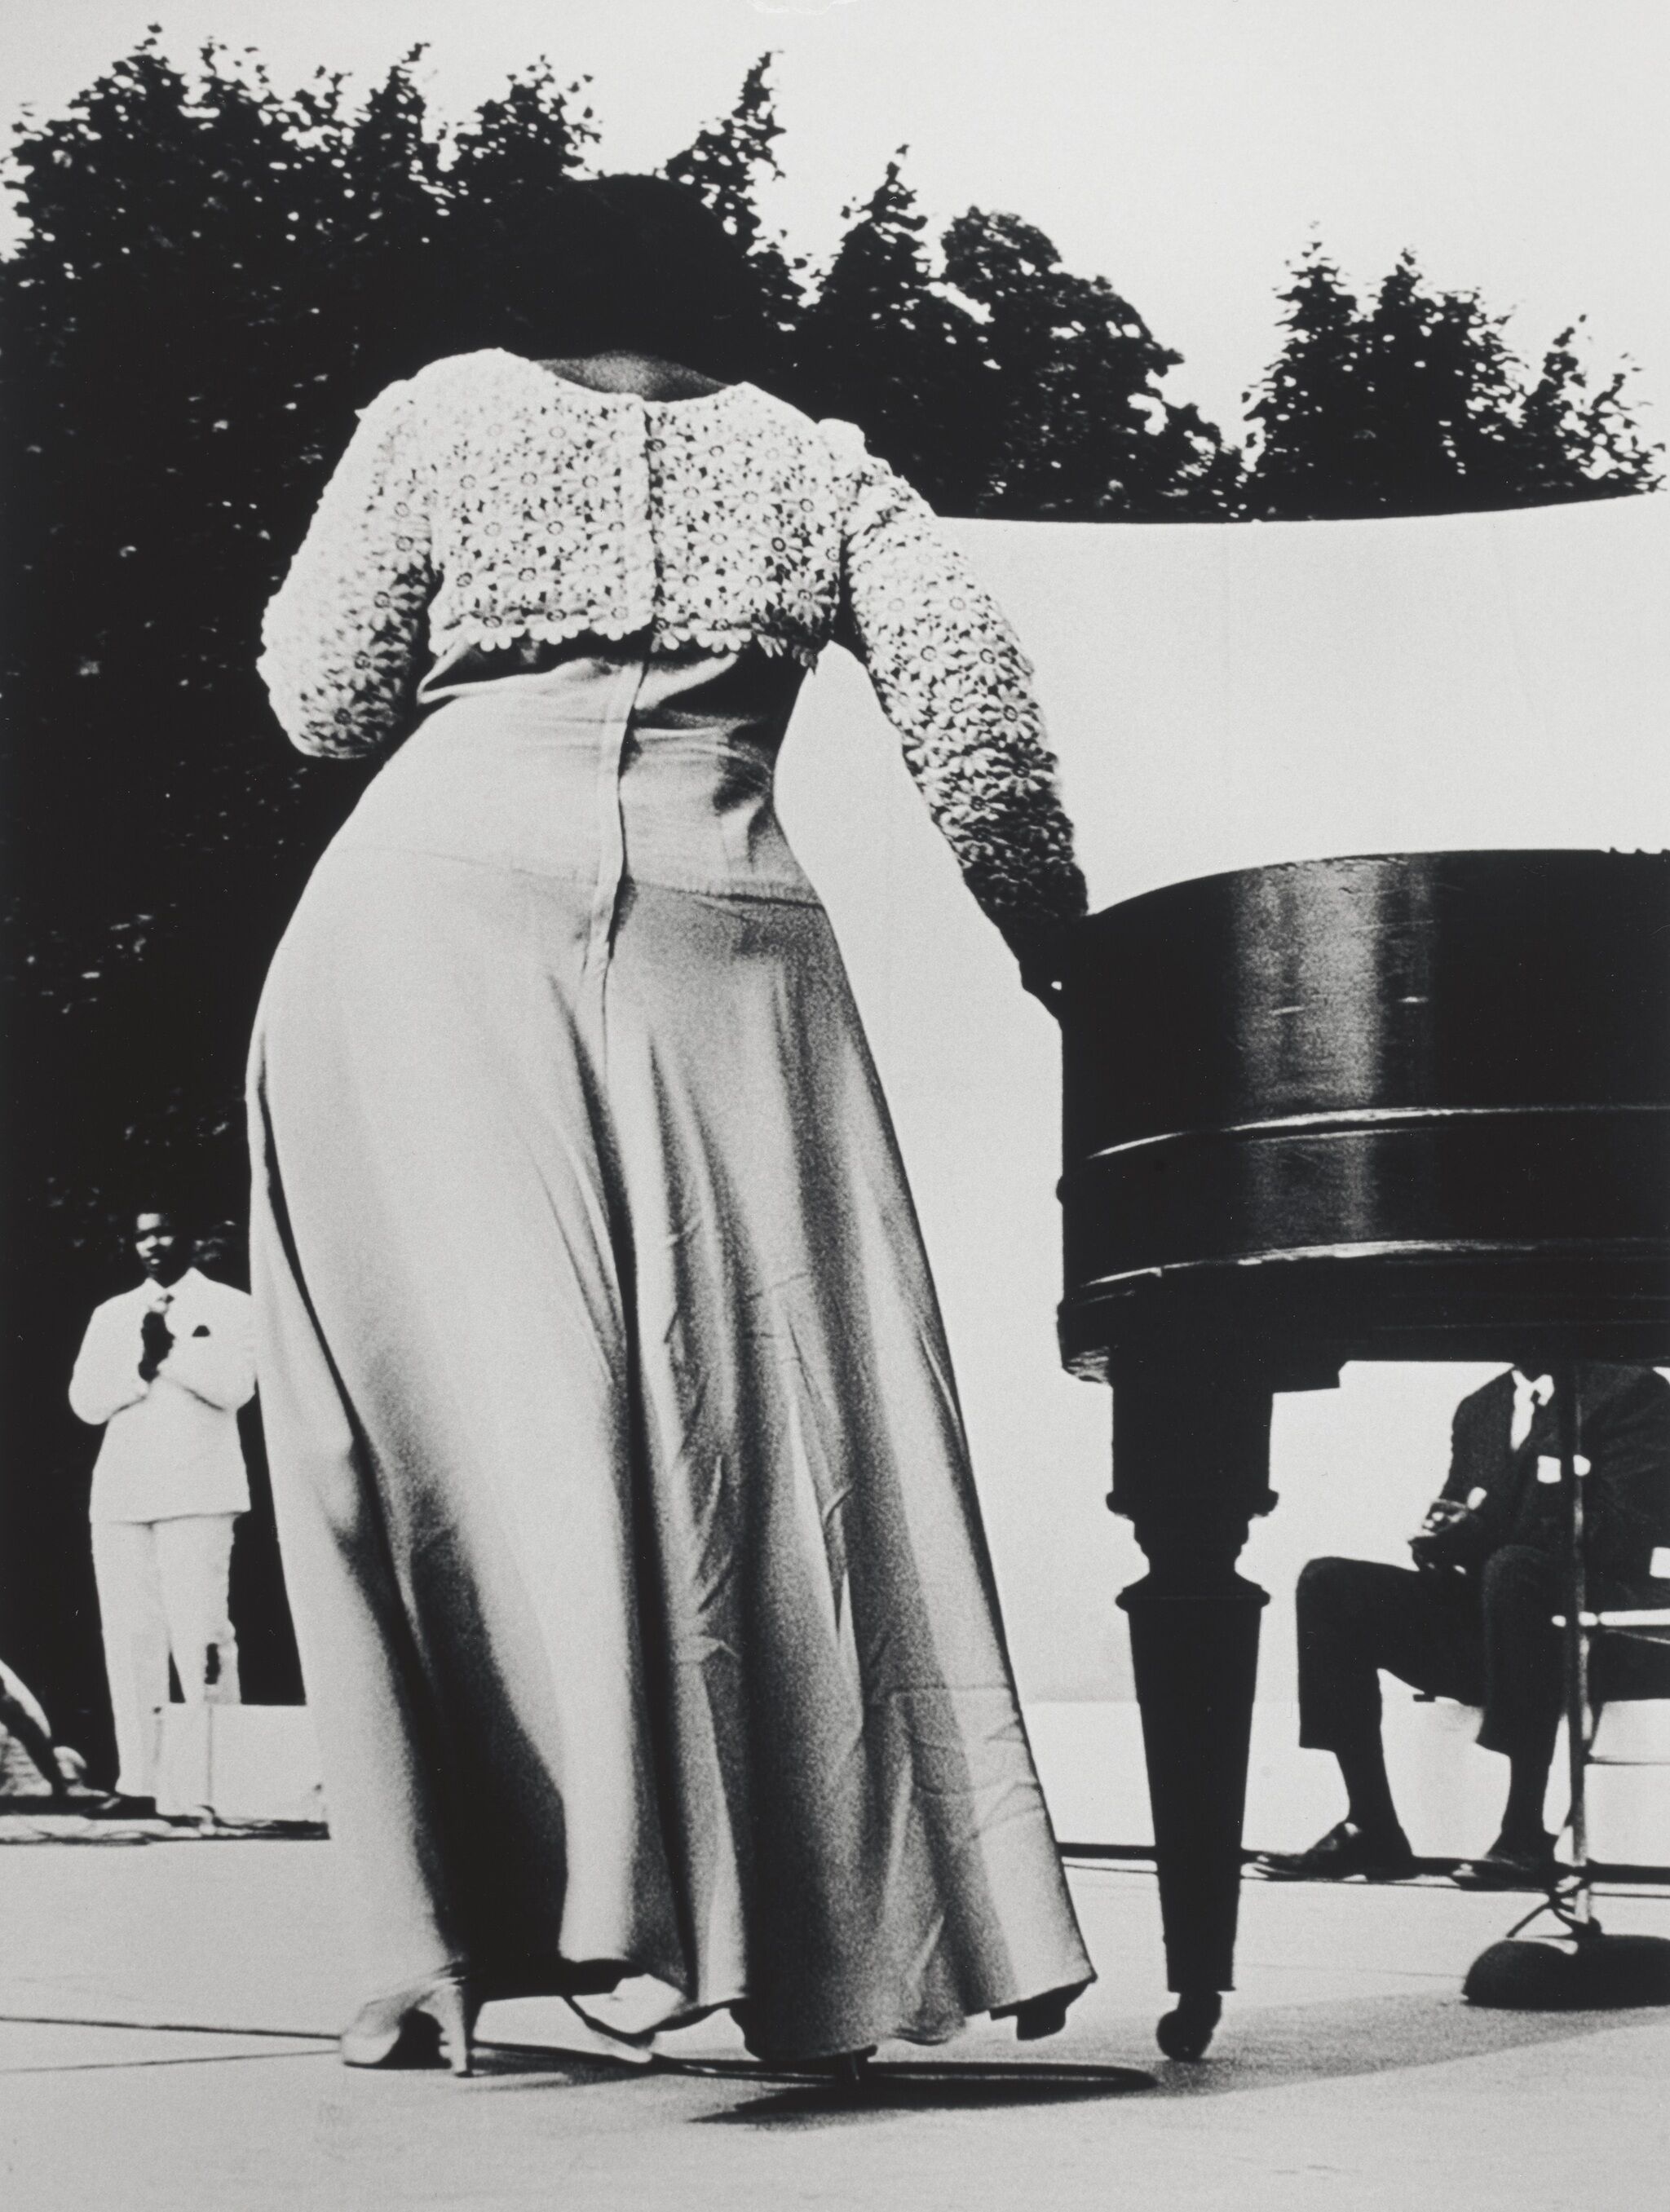 A woman with her back turned standing outdoors in a dress and high-heeled shoes.